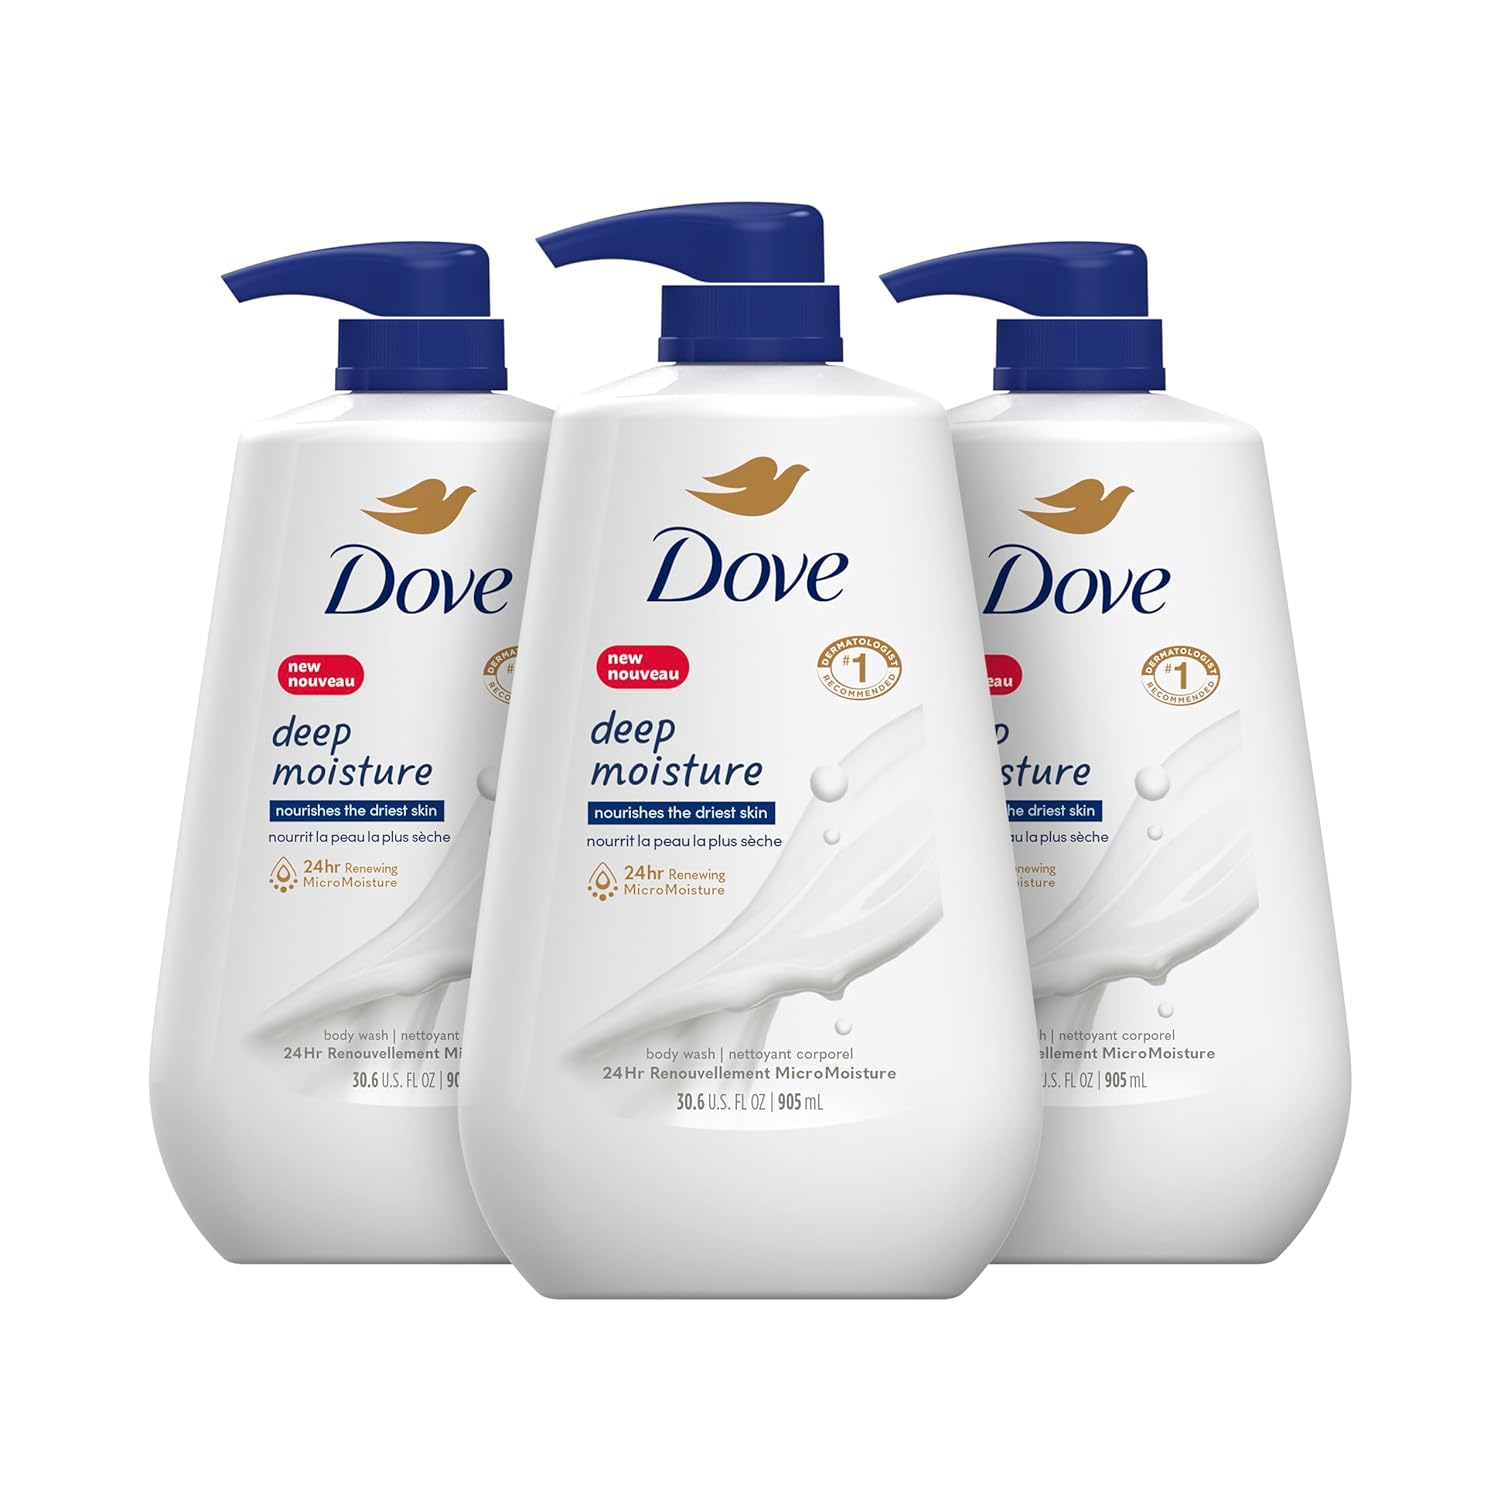 Save $15 when you buy $60 of participating Unilever items across Household Essentials at Amazon